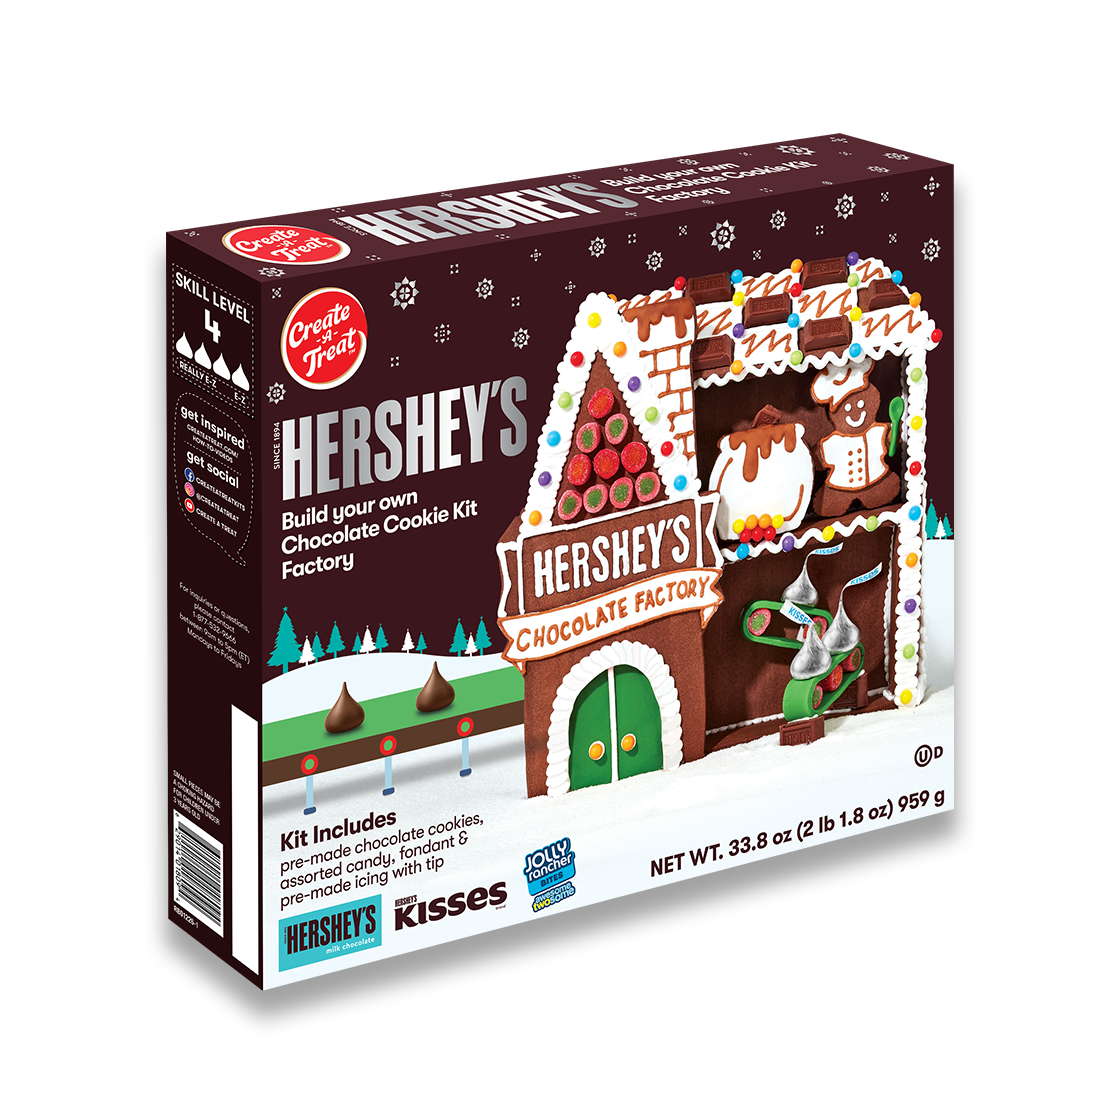 Create A Treat Hershey's Build Your Own Chocolate Cookie Kit Factory x 33.8 oz.